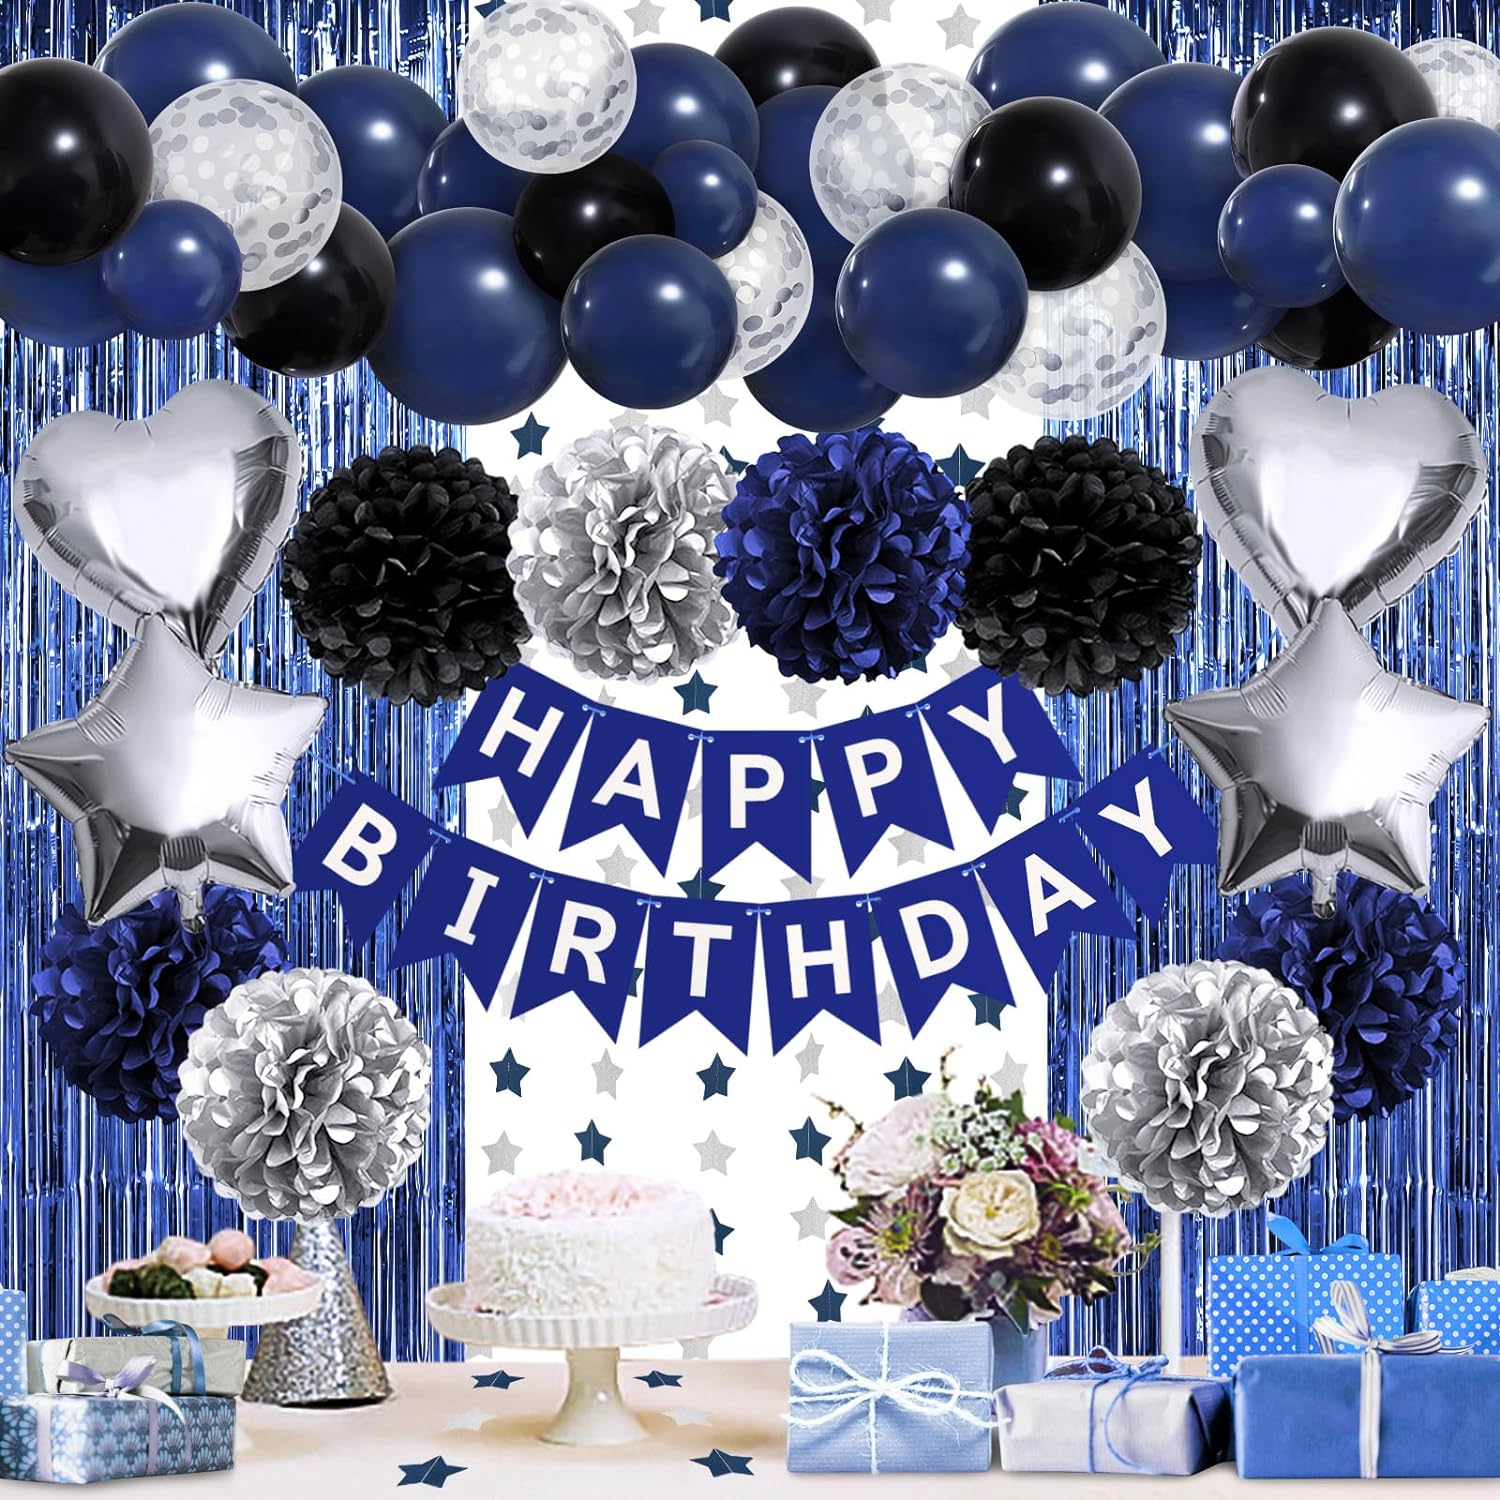 ZERODECO Birthday Party Decorations for Men, Black Navy Blue Silver Happy Birthday Banner Pompoms Balloon Arch Fringe Curtain Party Dcor for Men Boys Women Girls Birthday Party Decorations Kit